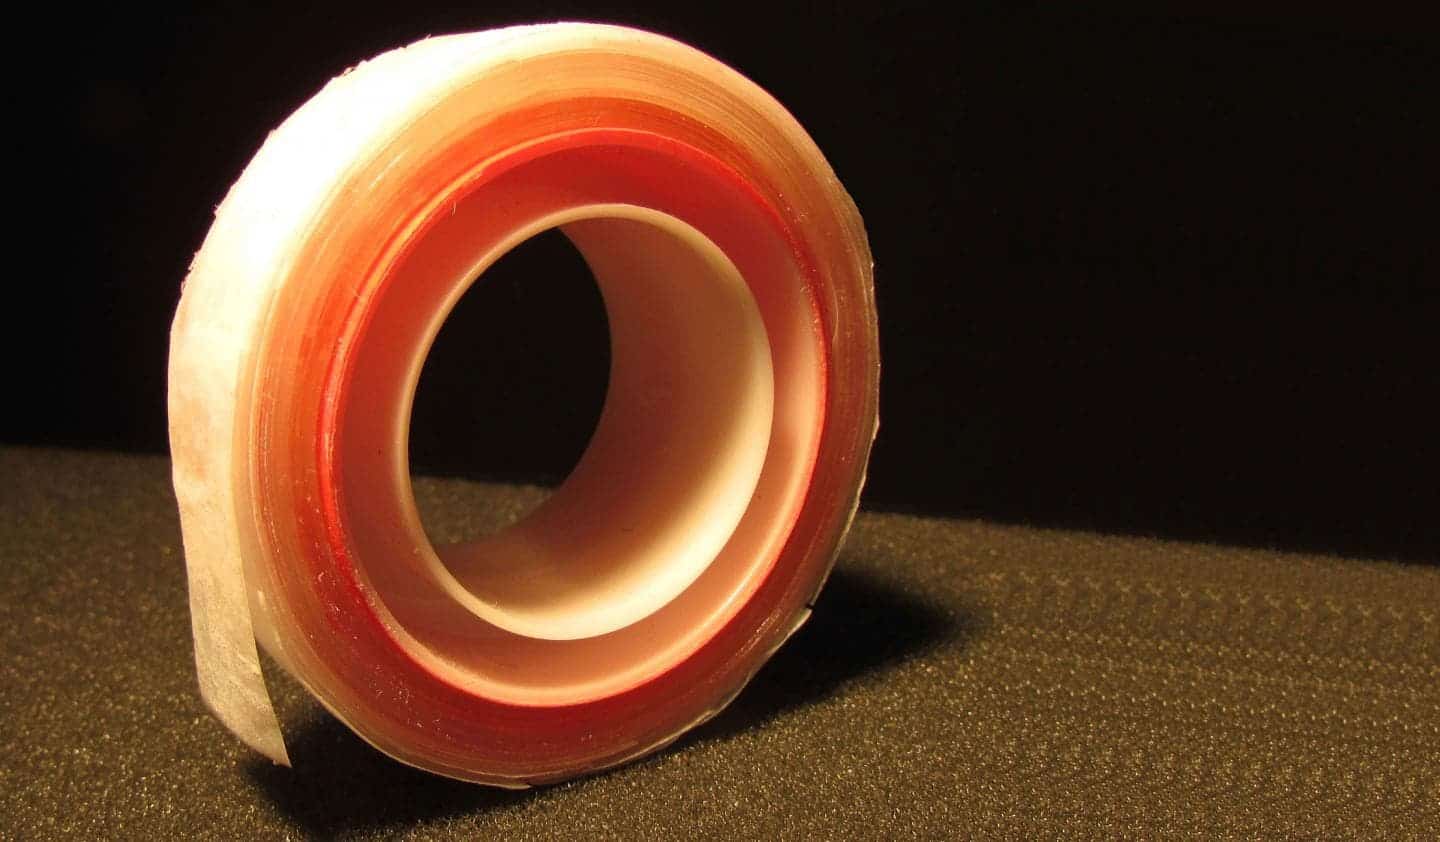 This is a superomniphobic tape that adheres to any surface and imparts liquid-repellant properties to it. Image credits: Colorado State University.